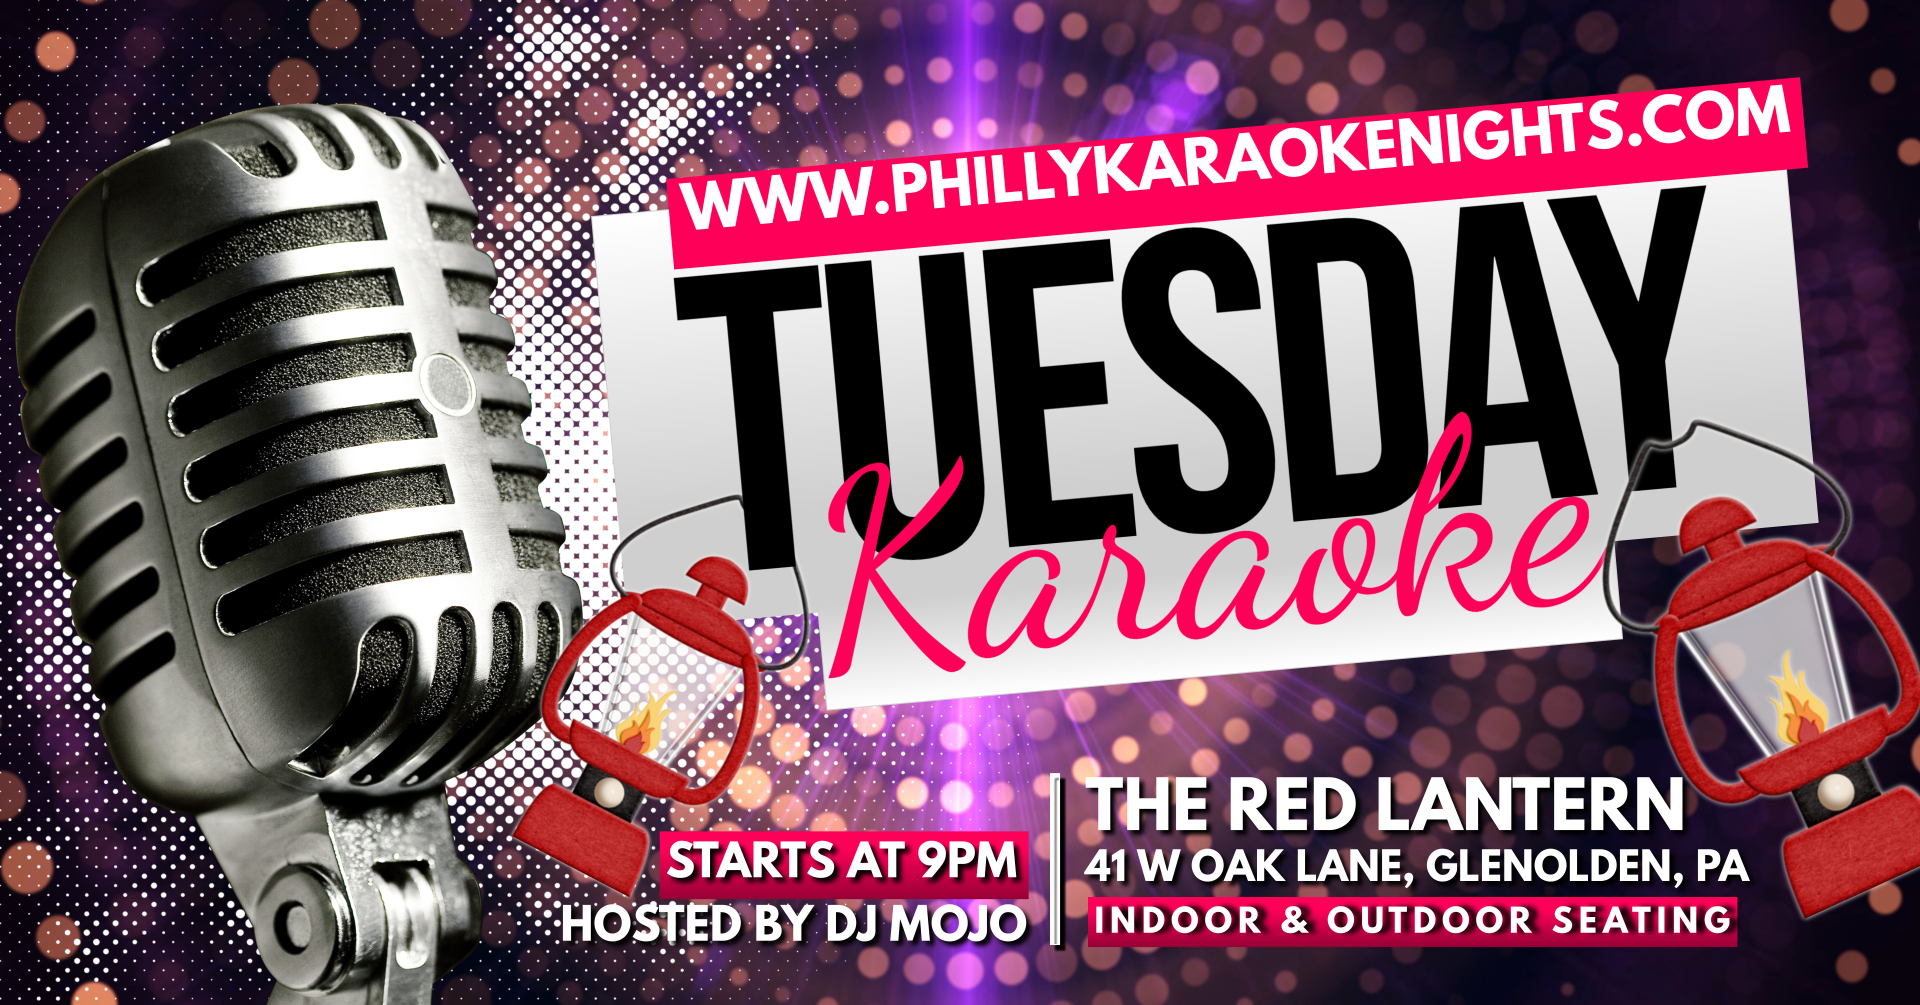 Tuesday Karaoke at The Red Lantern (Glenolden, PA - Delaware County, PA)